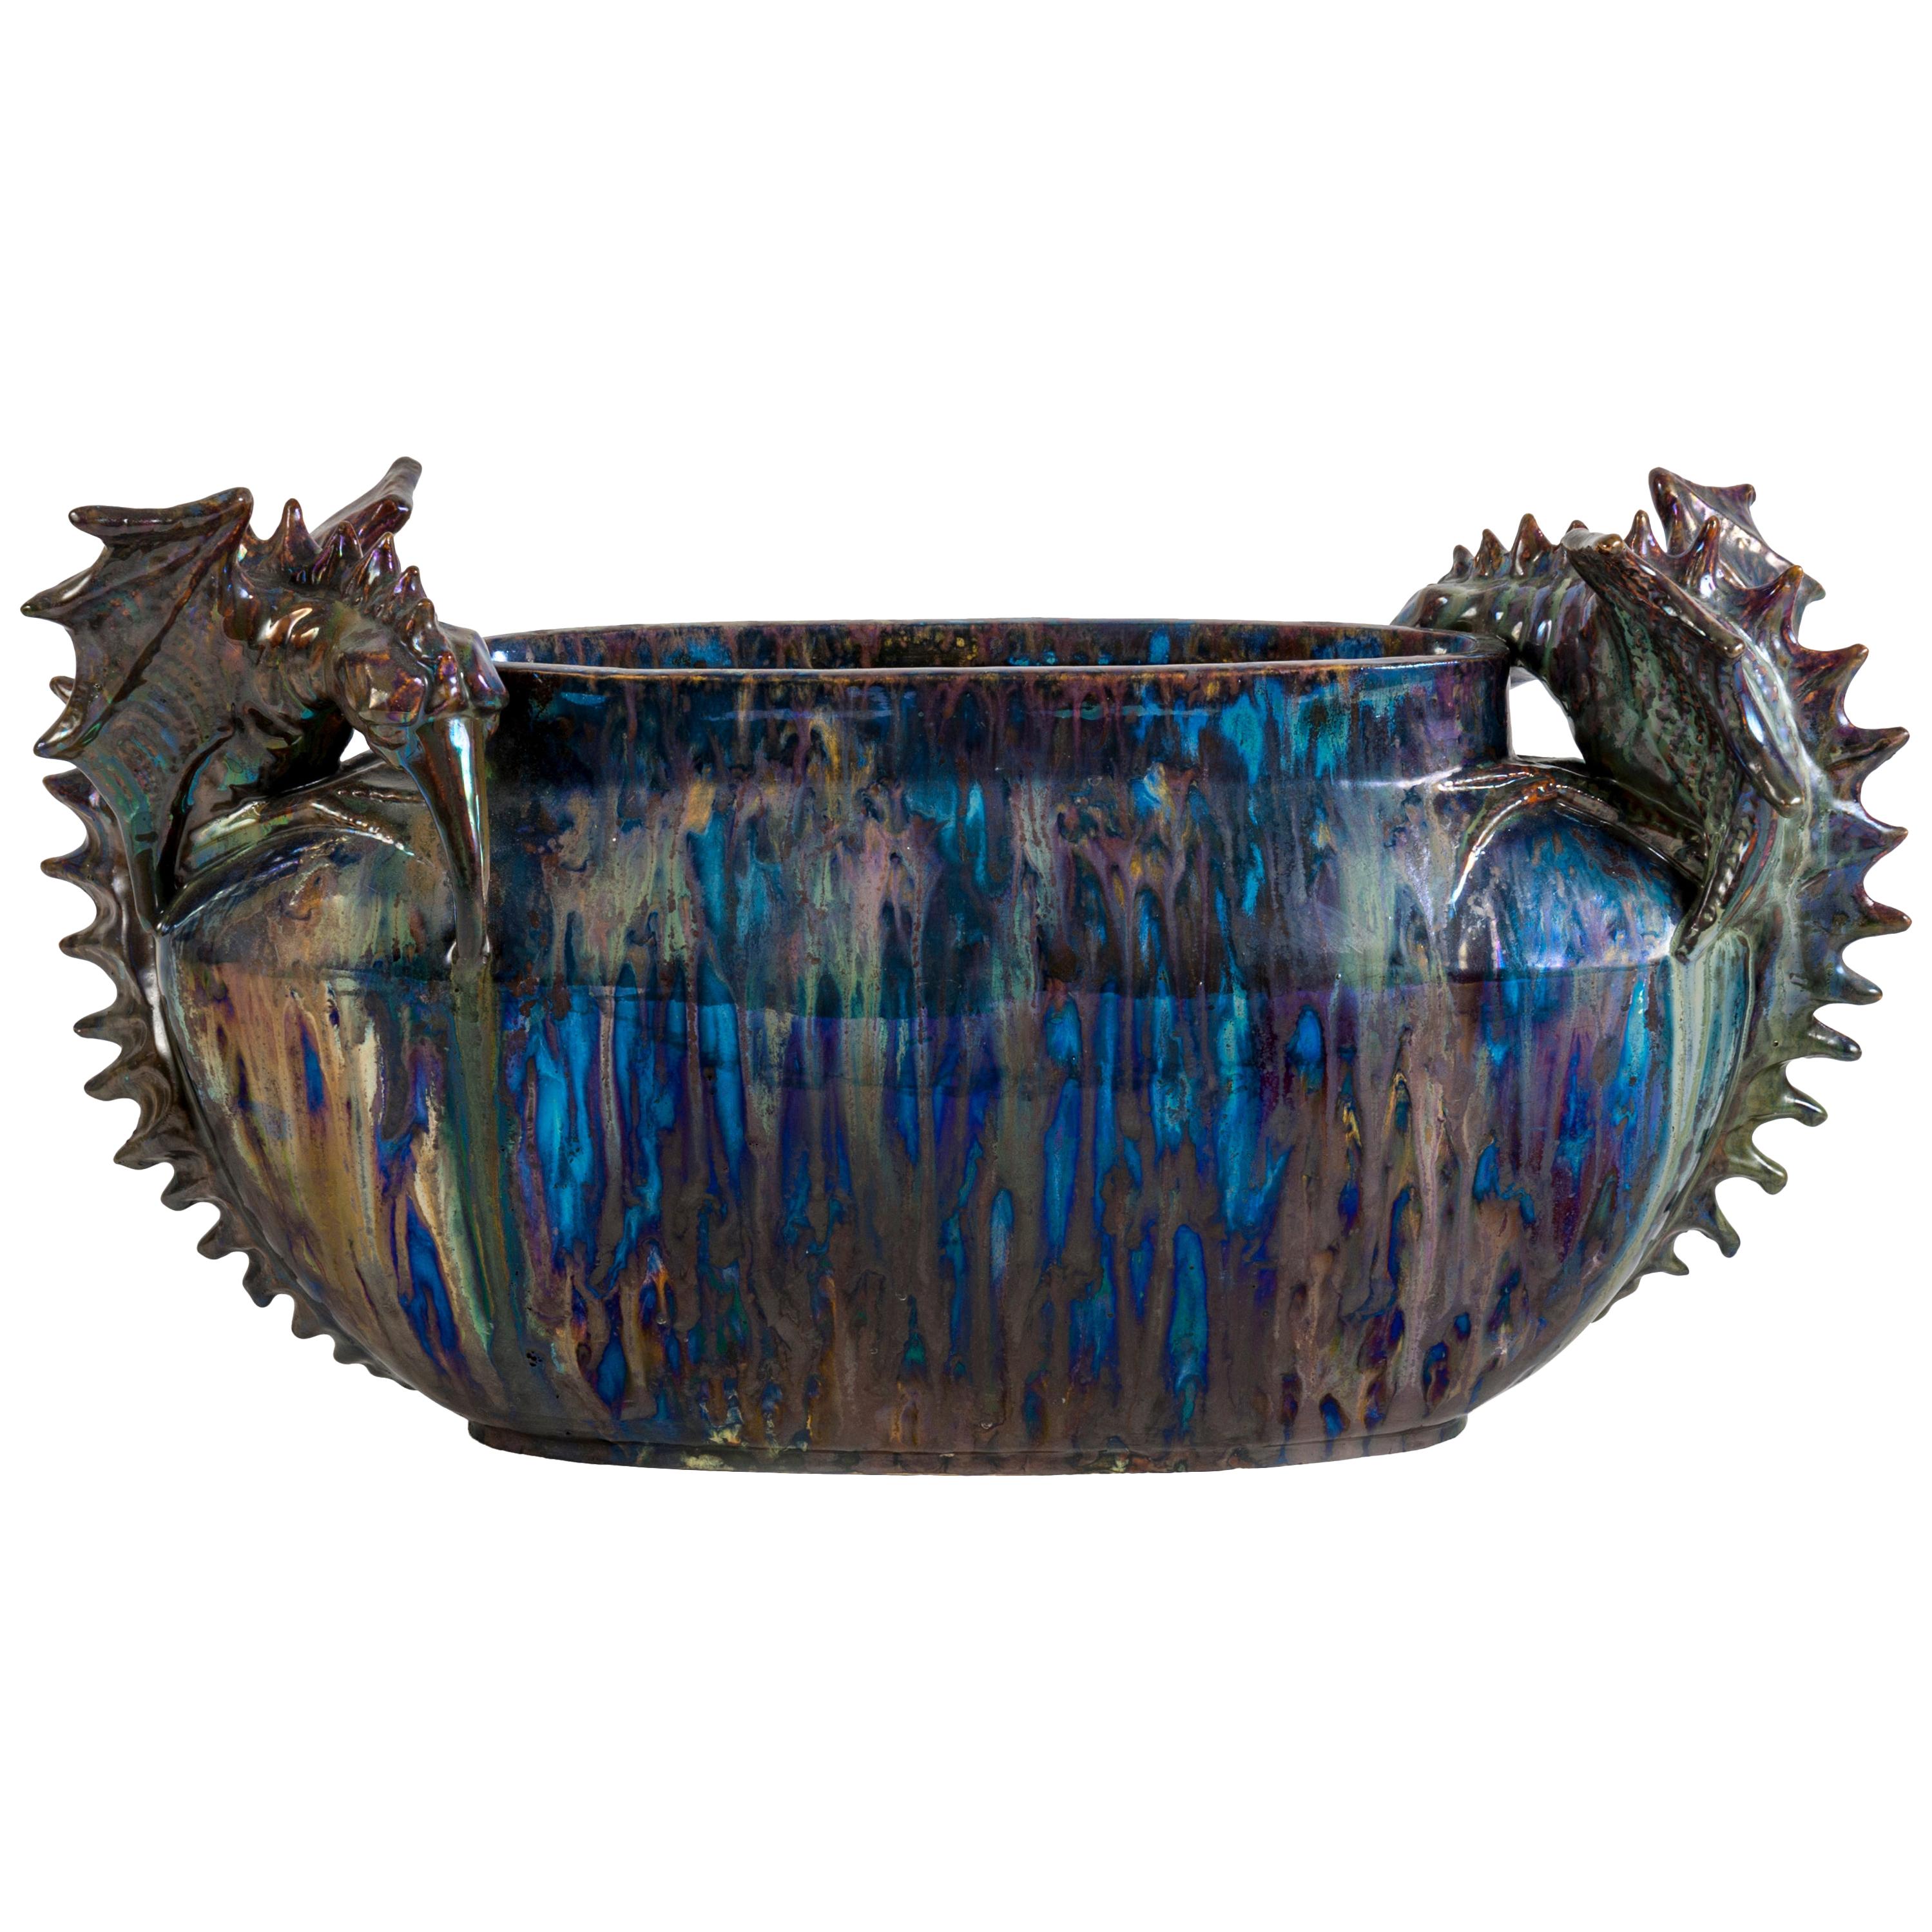 Planter with Fantastic Creatures Attributed to the Pierrefonds Manufacture For Sale